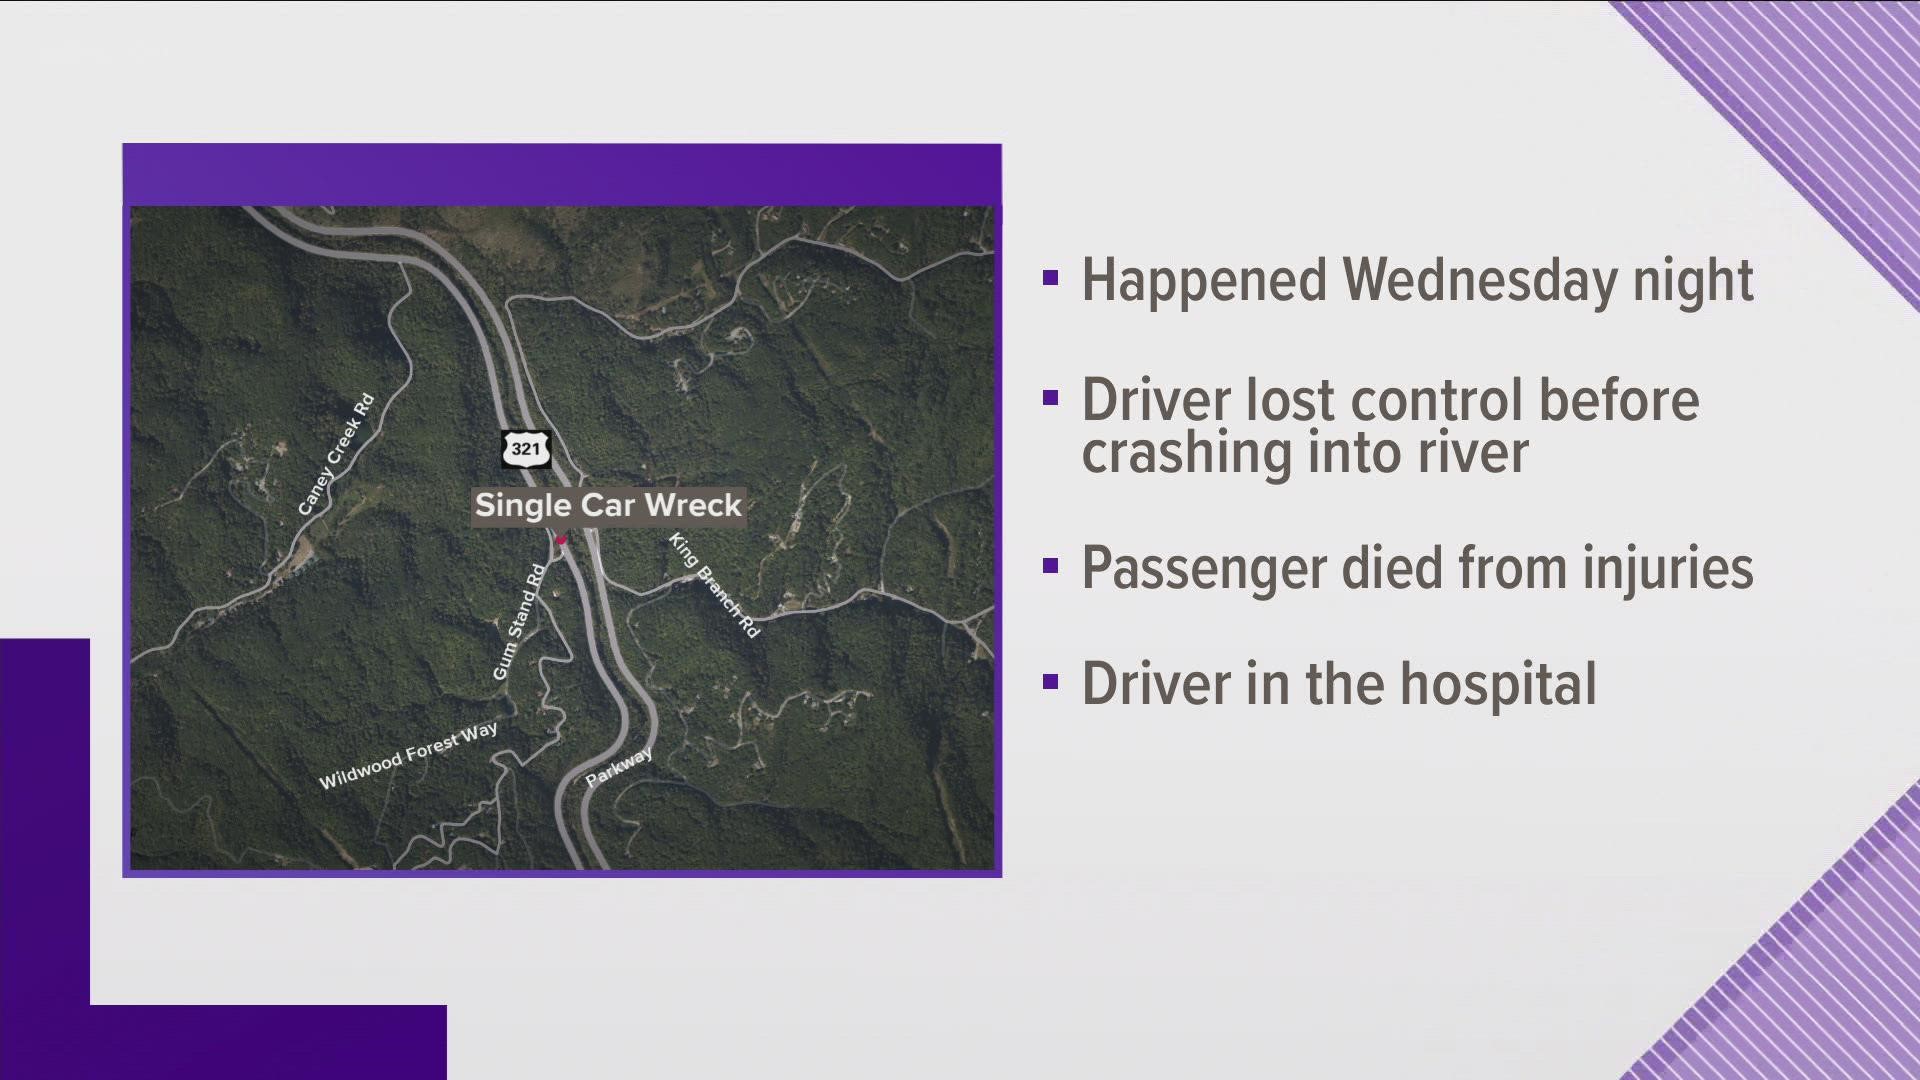 The GSMNP said a vehicle lost control near Gum Stand Road and went into the river Wednesday, killing a passenger.